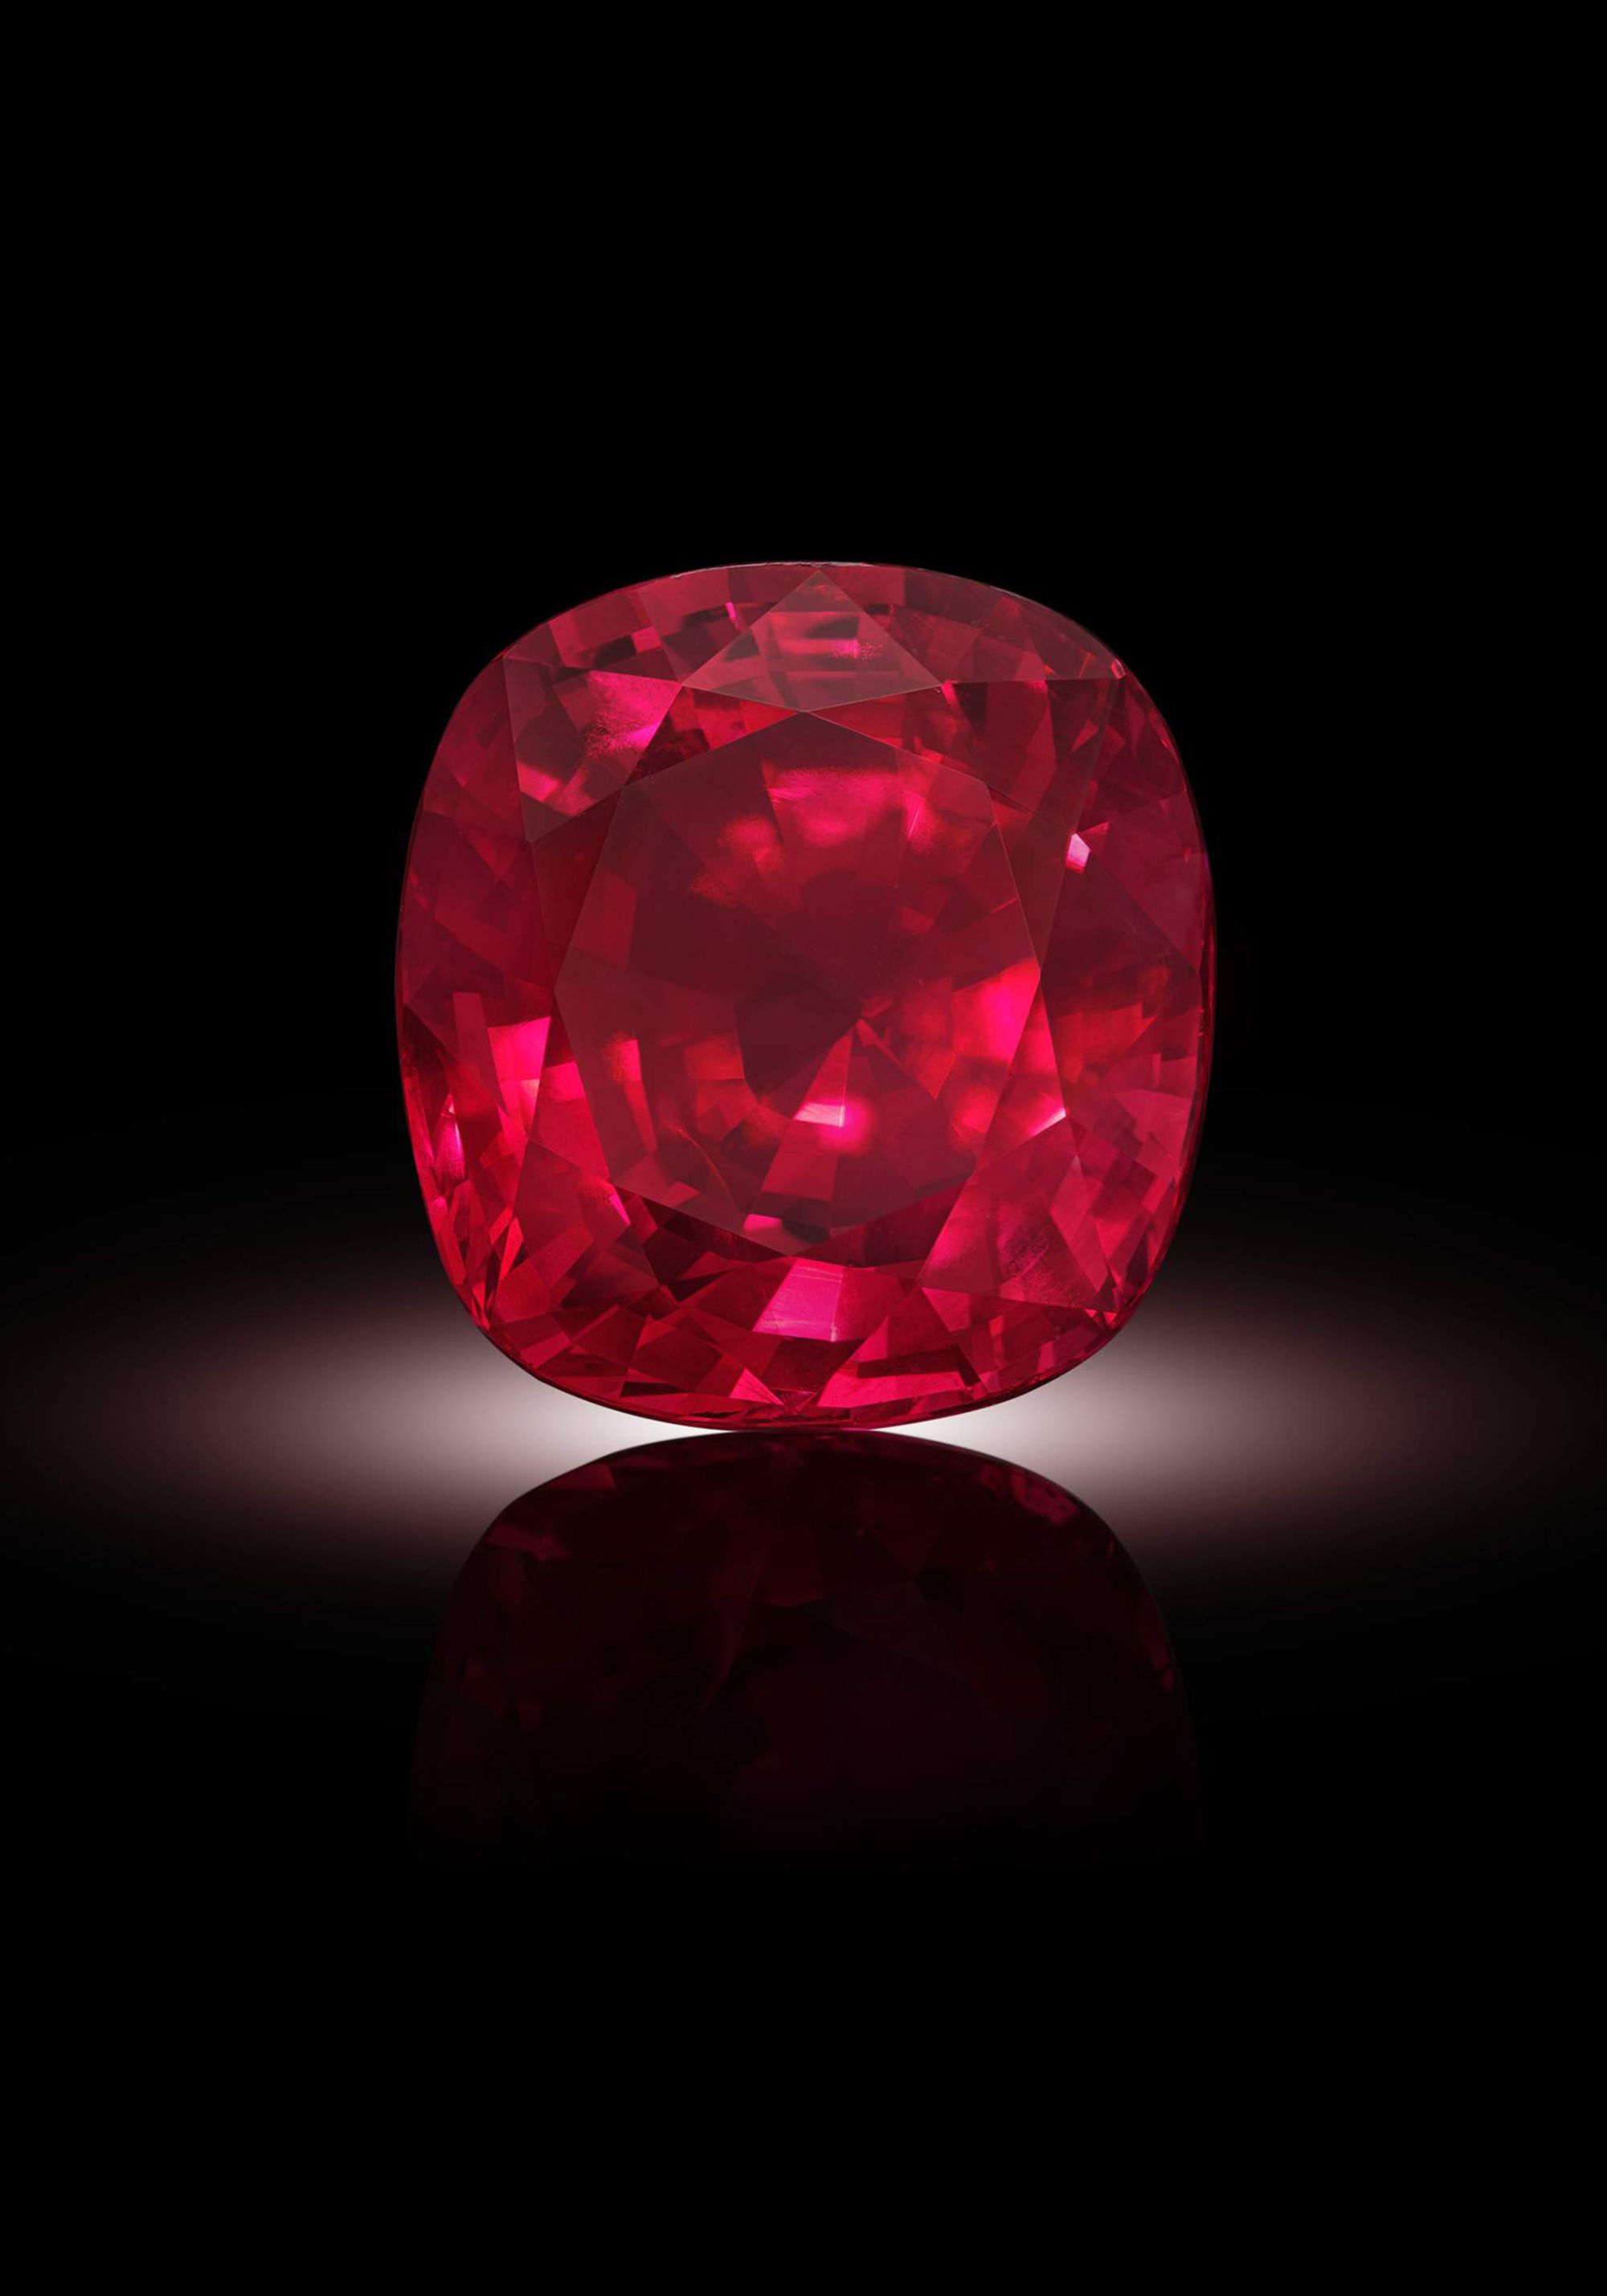 Largest ruby ever to come to auction sells for record-breaking